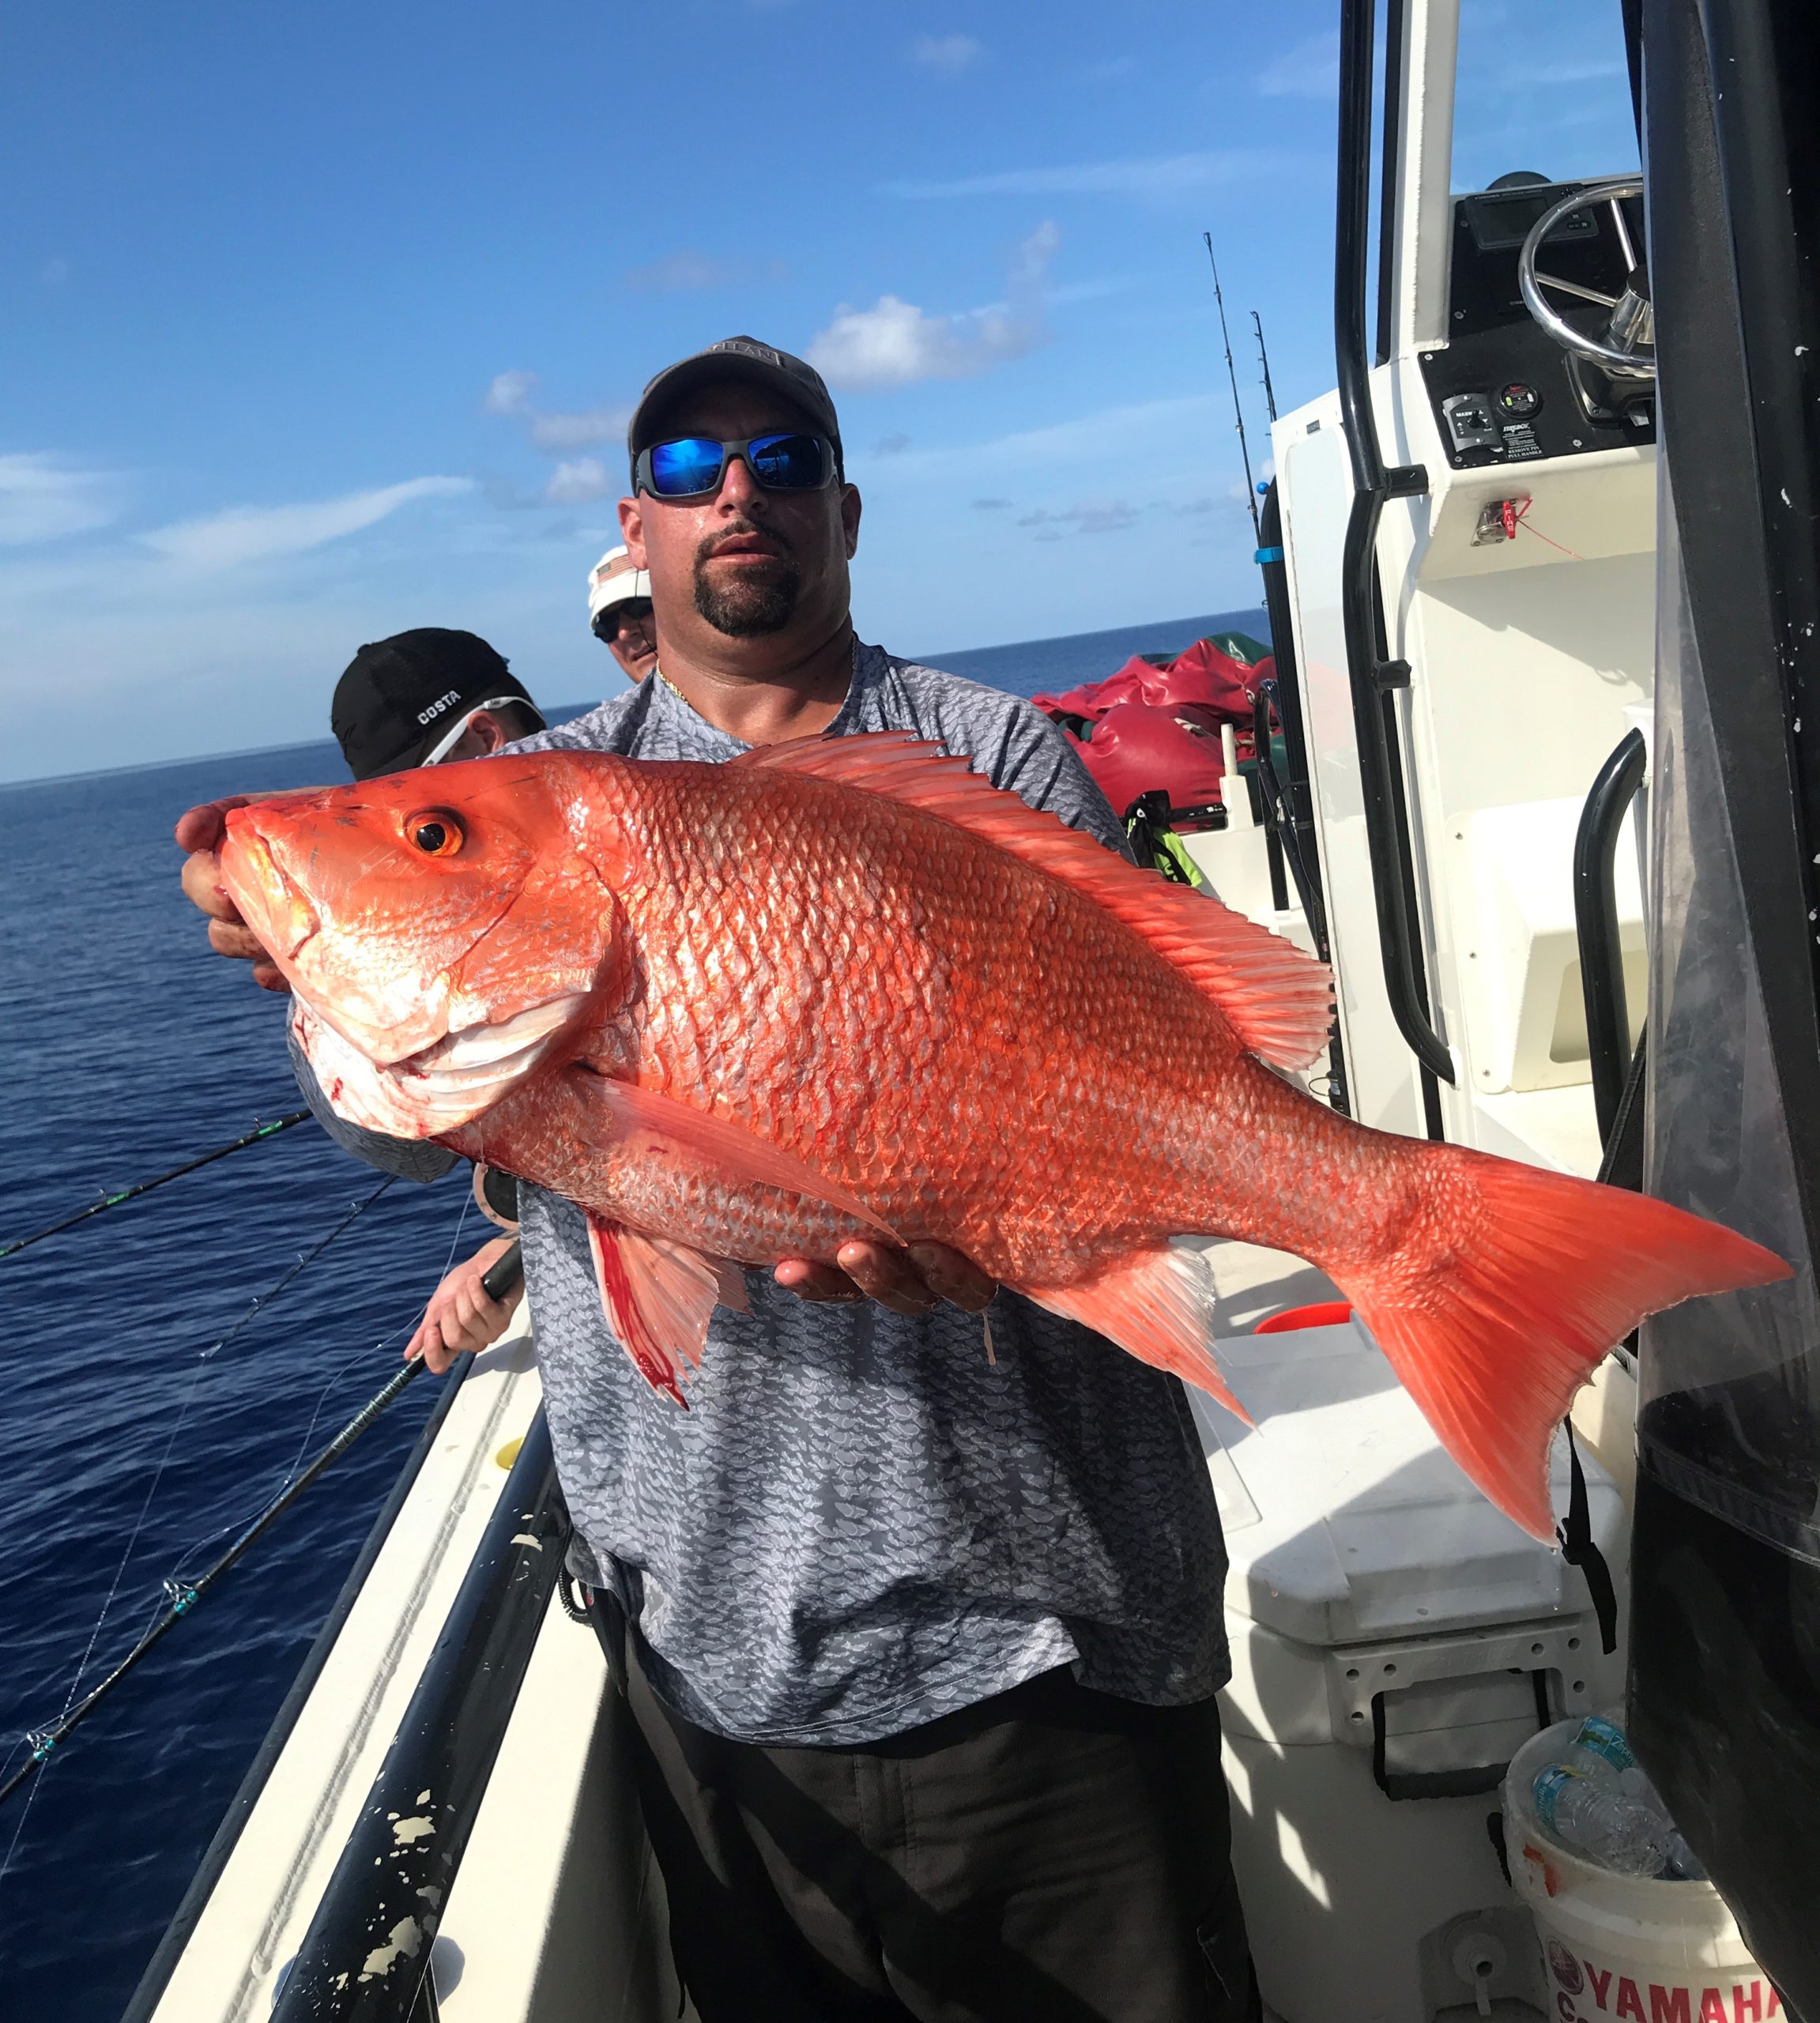 https://gulfcouncil.org/wp-content/uploads/Red-Snapper-Hubbard-33-scaled.jpeg